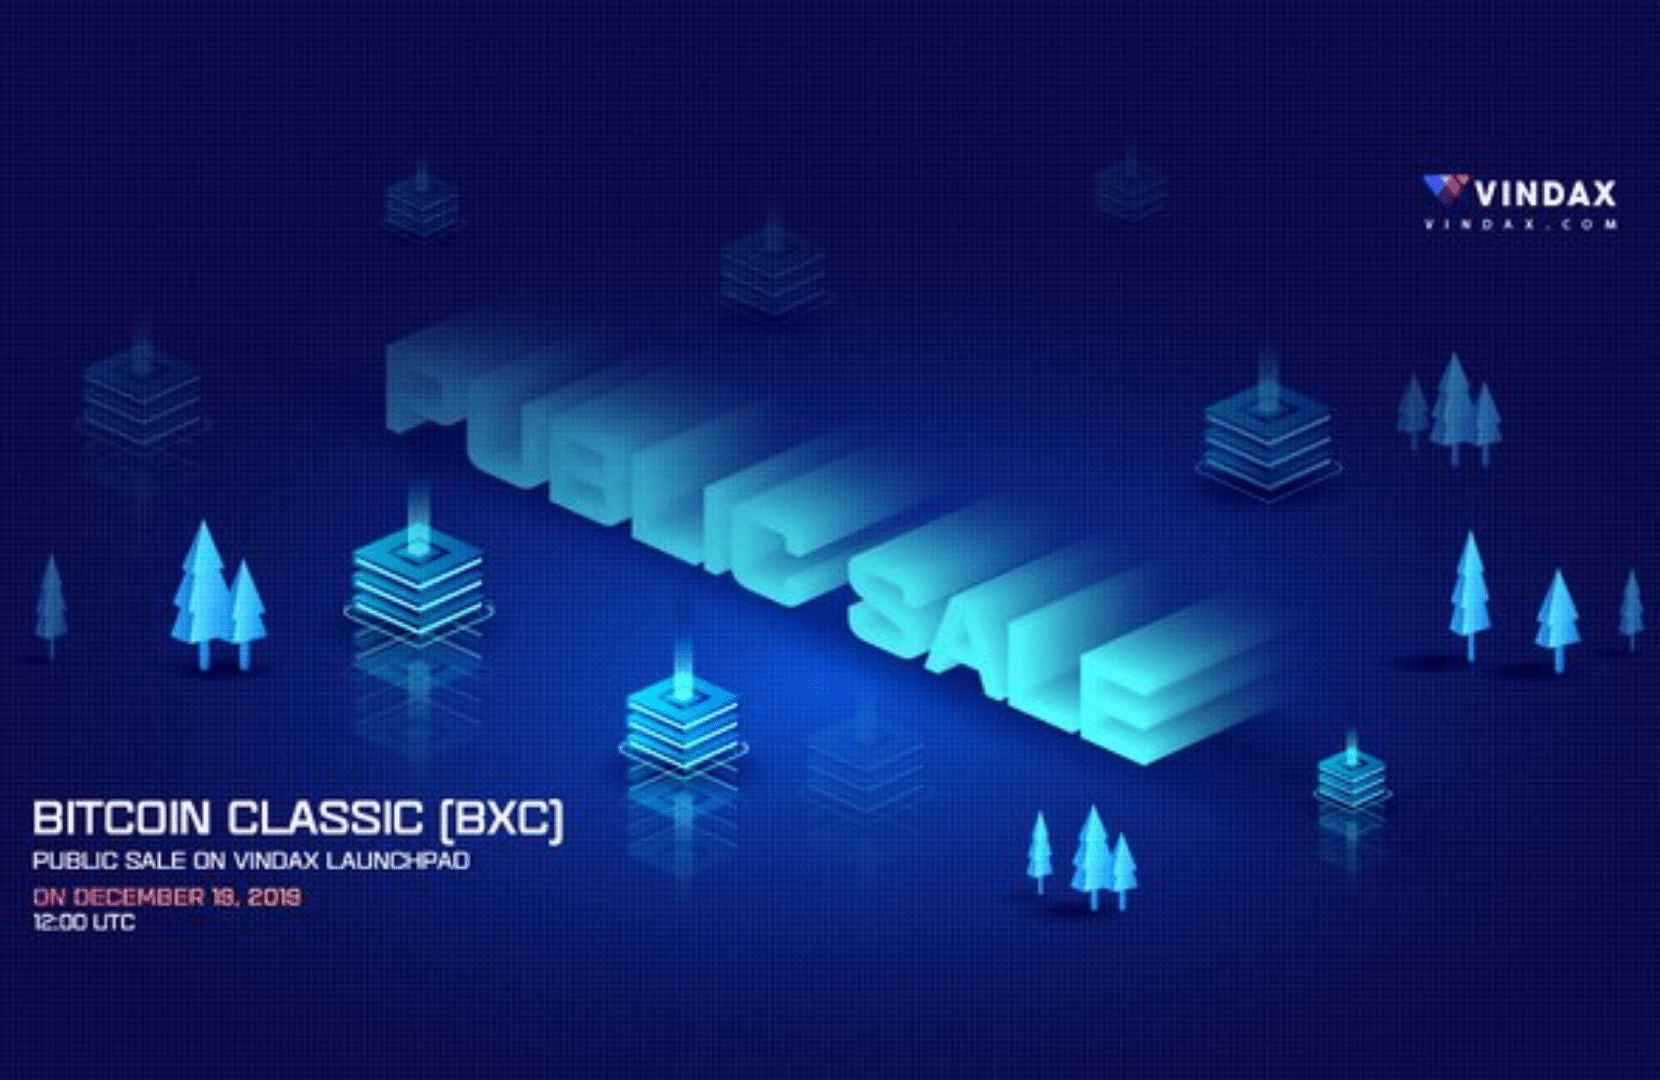 BITCOIN CLASSIC(BXC) AIRDROP NEW ROUND, FREE 35 BXC. GASKAN BOSQUE